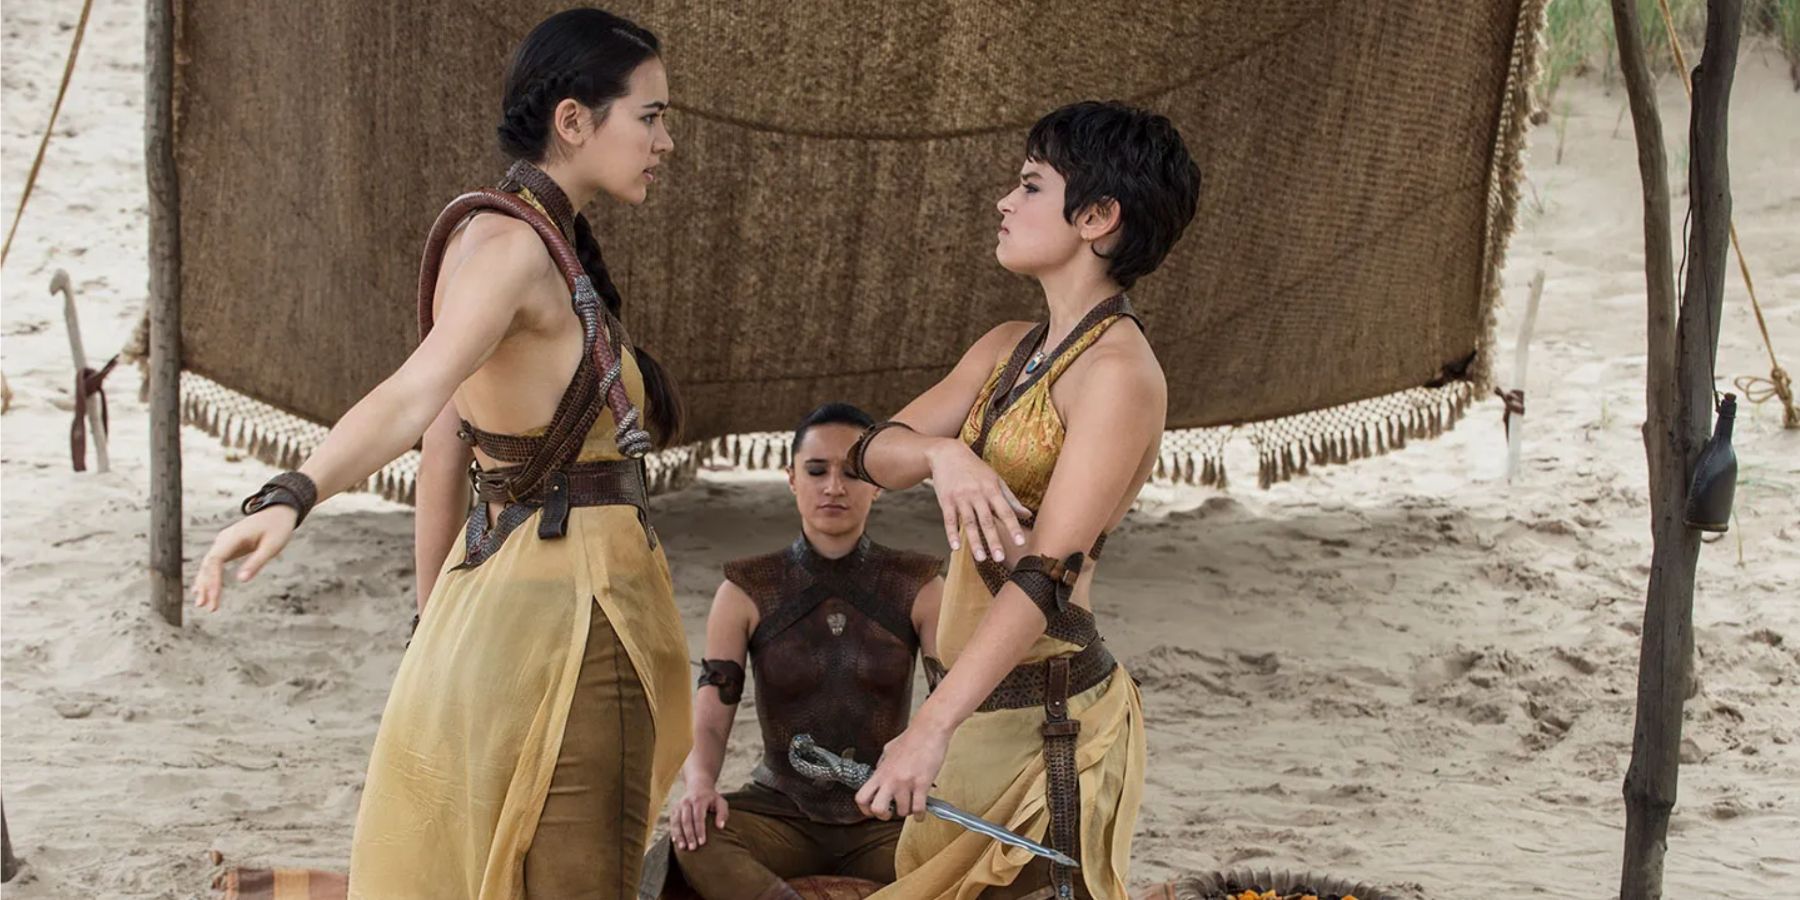 The Dornish Sand Snakes Obara, Nymeria, and Tyene in Game of Thrones.